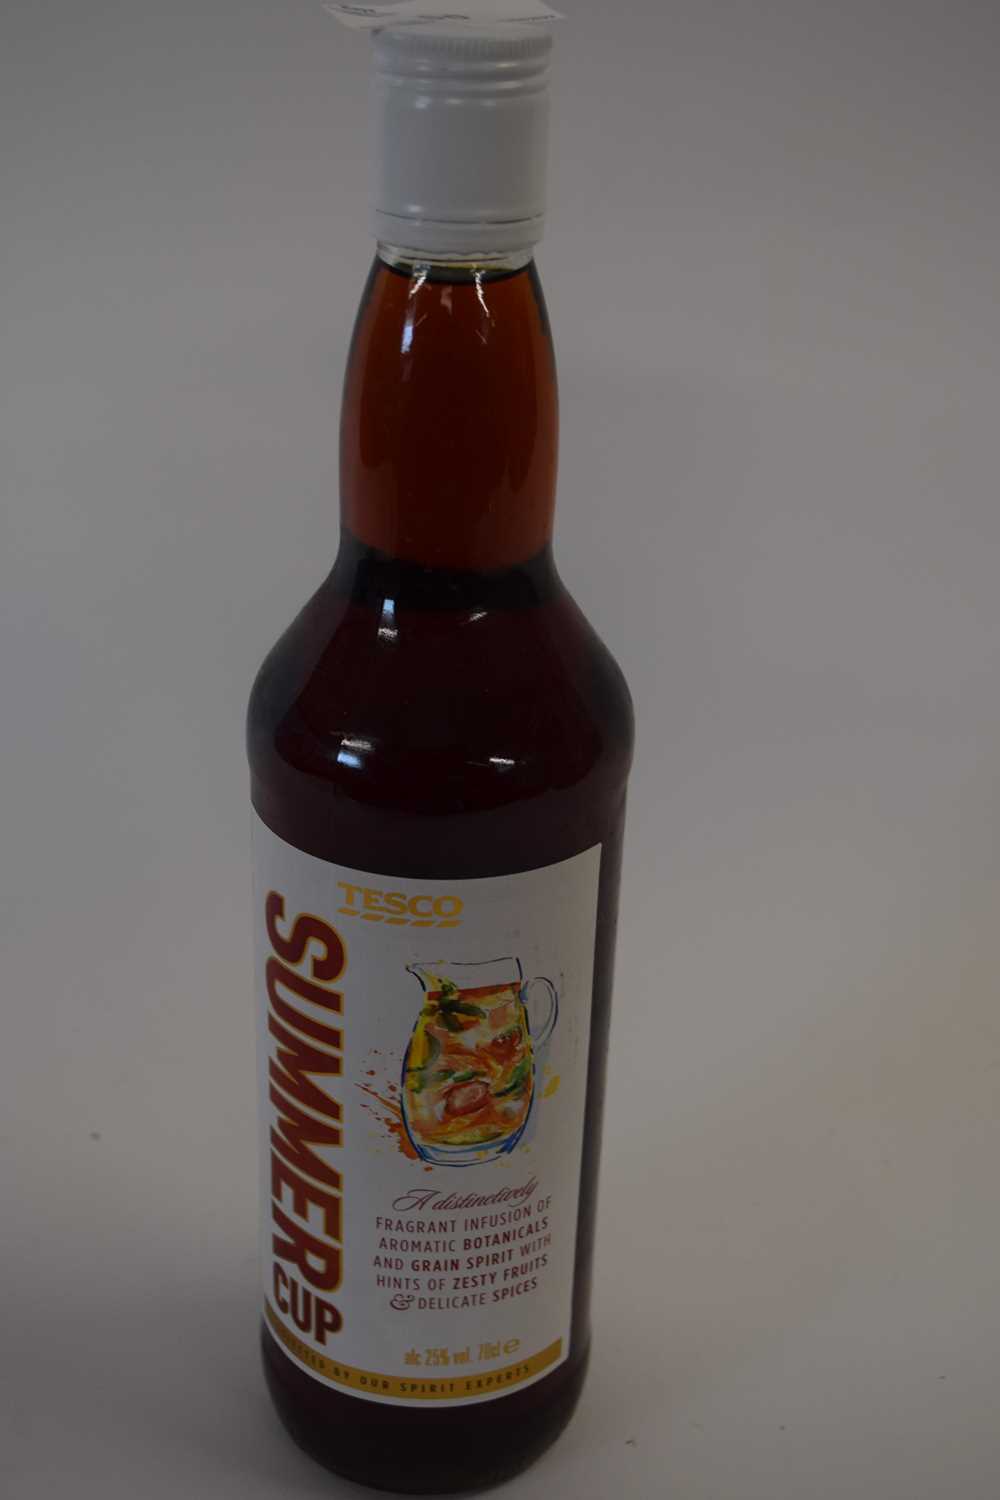 Lot 50 - 1 BOTTLE OF TESCO SUMMER CUP (PIMMS-STYLE DRINK)